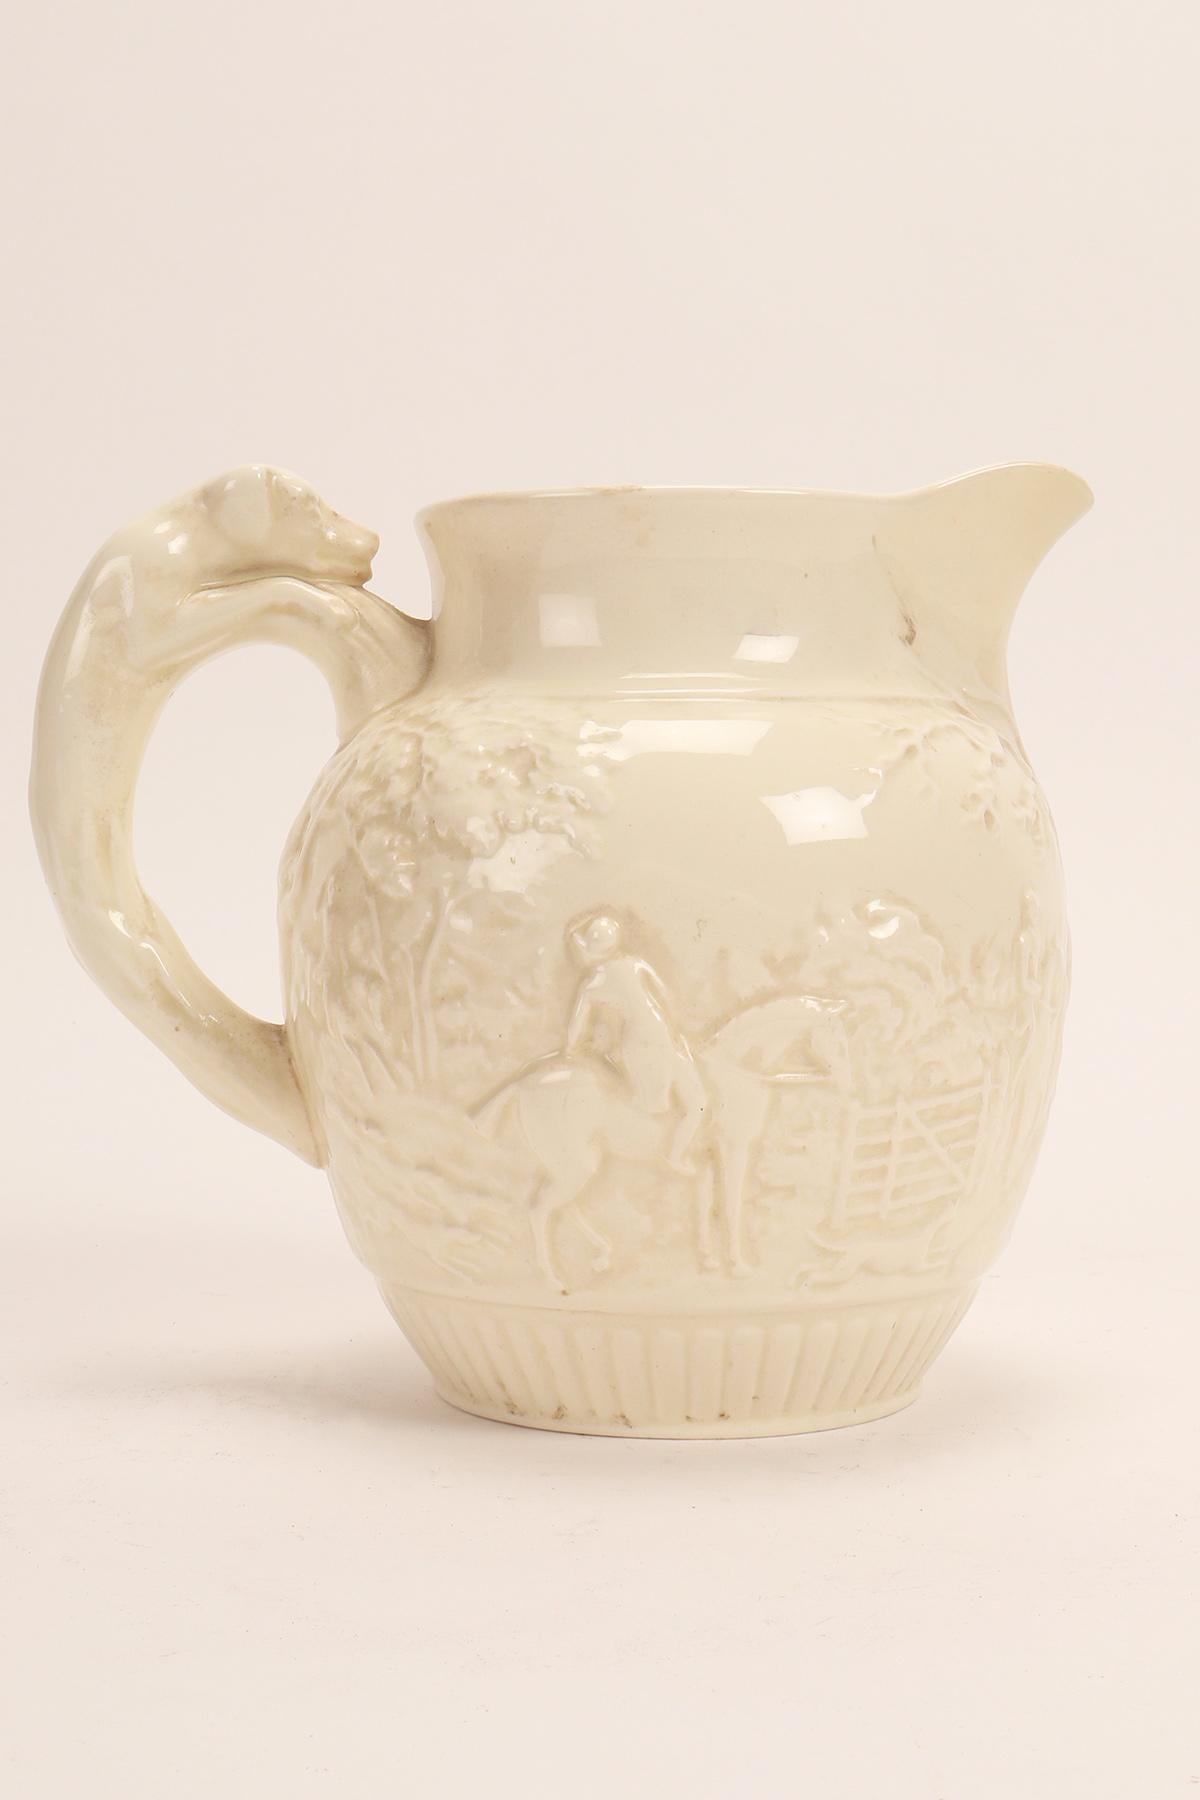 20th Century Wedgwood Ceramic Jug, with Hunting Scenes, England 1940s For Sale